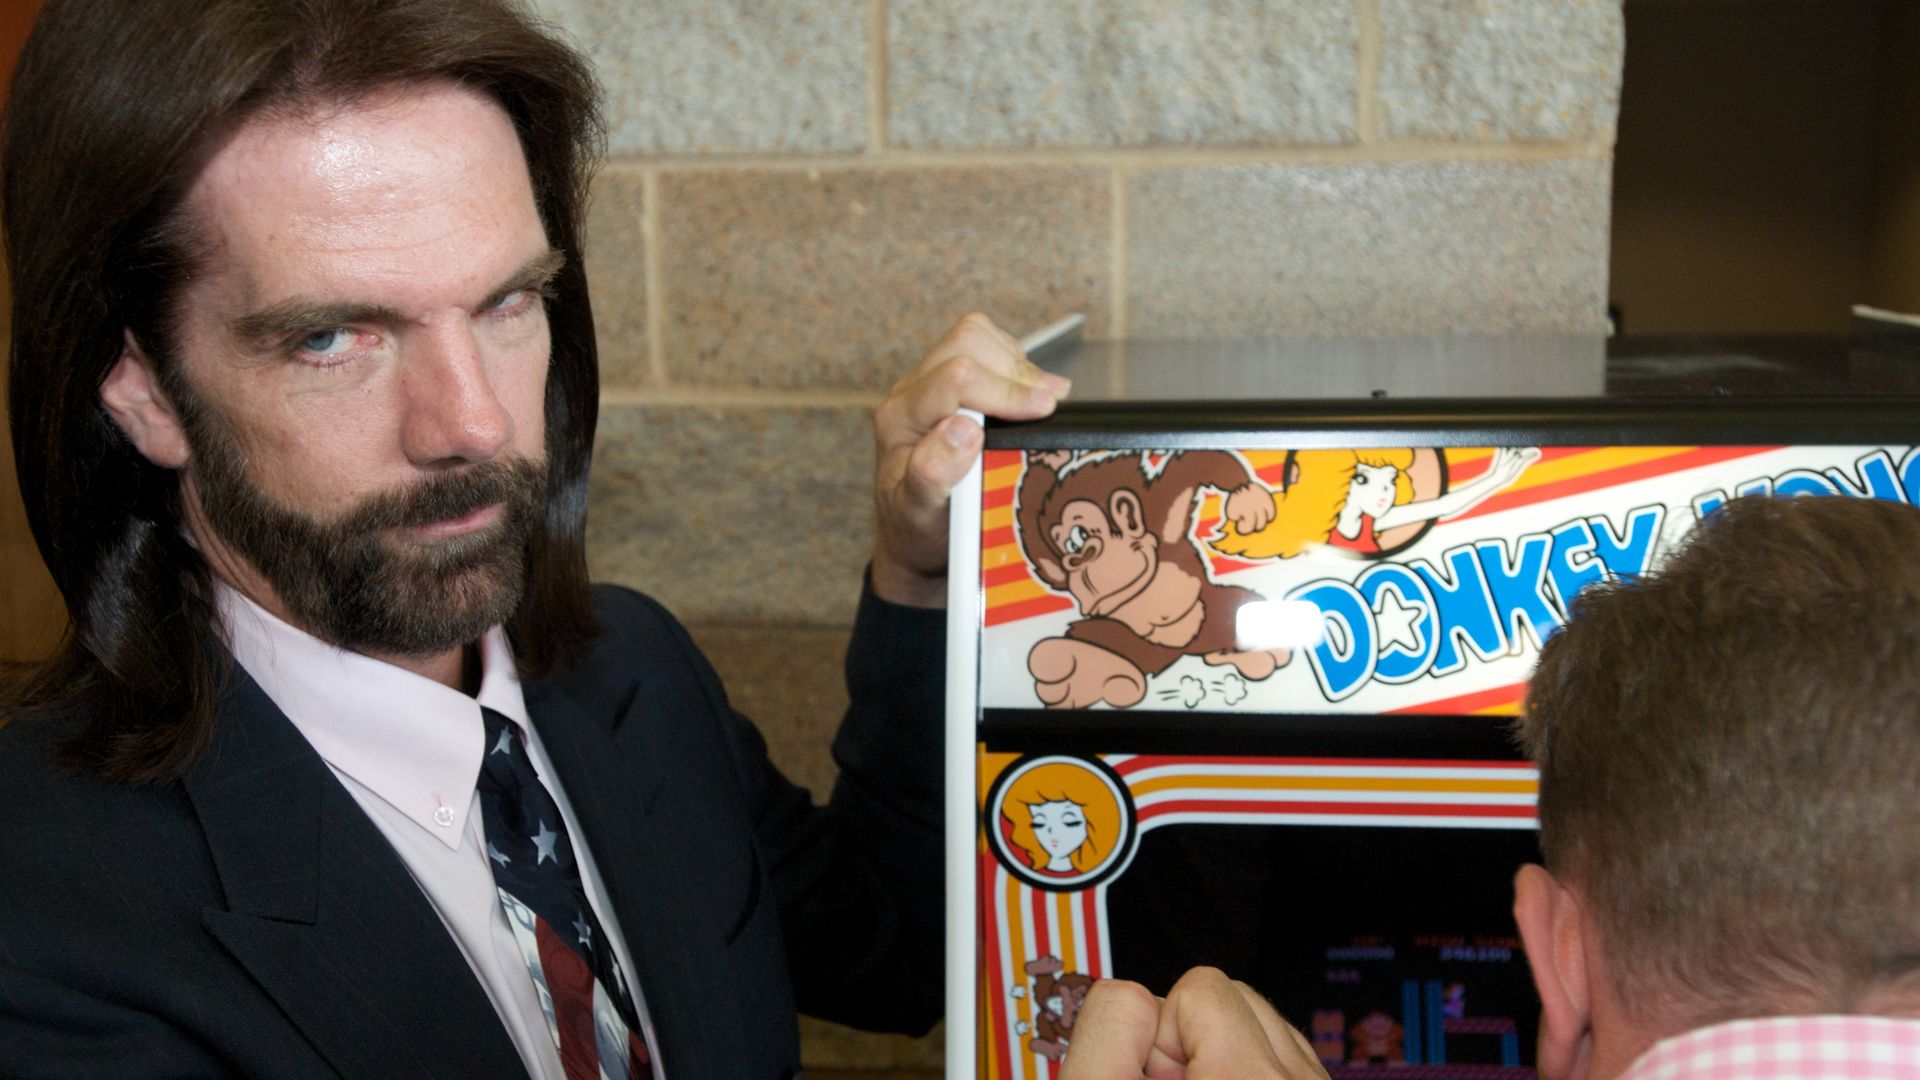 Billy Mitchell, with long dark hair and beard, stands beside a Donkey Kong arcade game. 